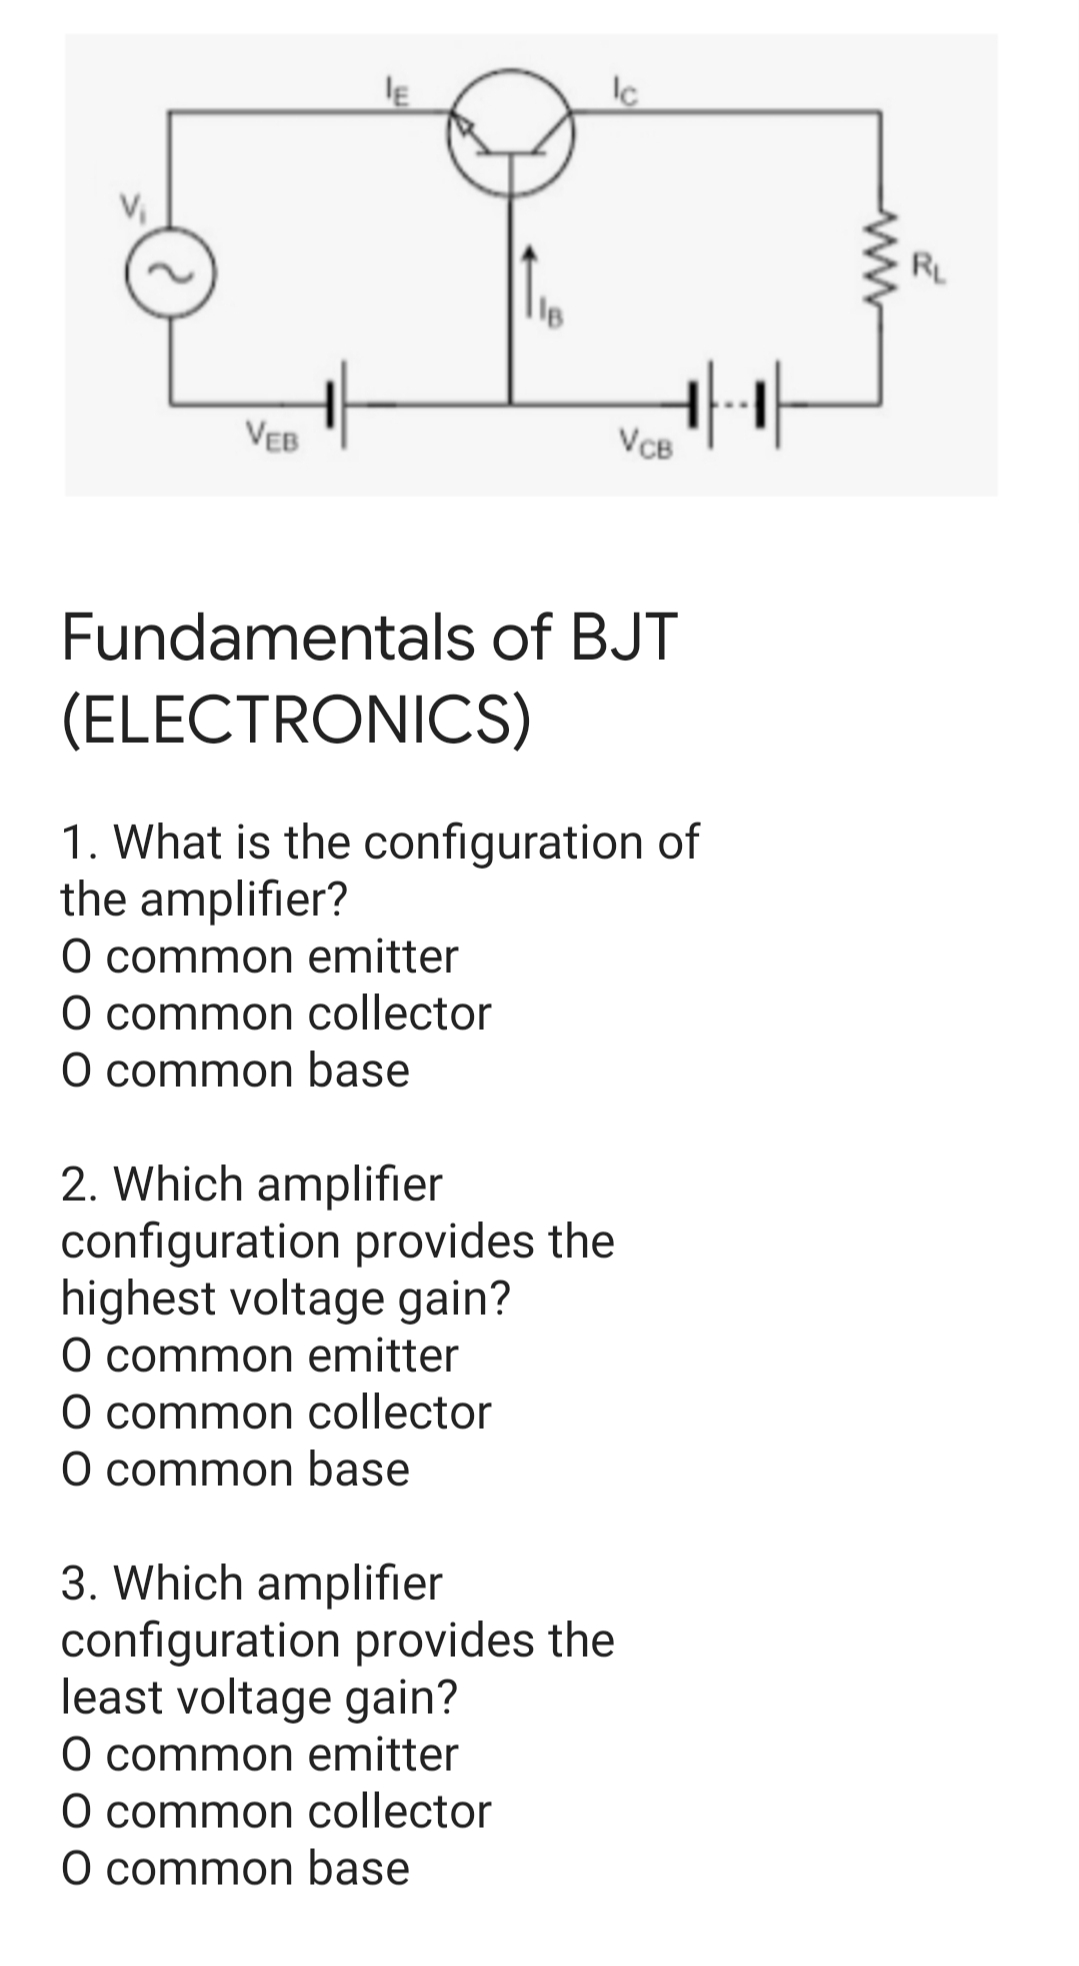 Ic
RL
VEB
VCB
Fundamentals of BJT
(ELECTRONICS)
1. What is the configuration of
the amplifier?
O common emitter
O common collector
O common base
2. Which amplifier
configuration provides the
highest voltage gain?
O common emitter
O common collector
O common base
3. Which amplifier
configuration provides the
least voltage gain?
O common emitter
O common collector
O common base
